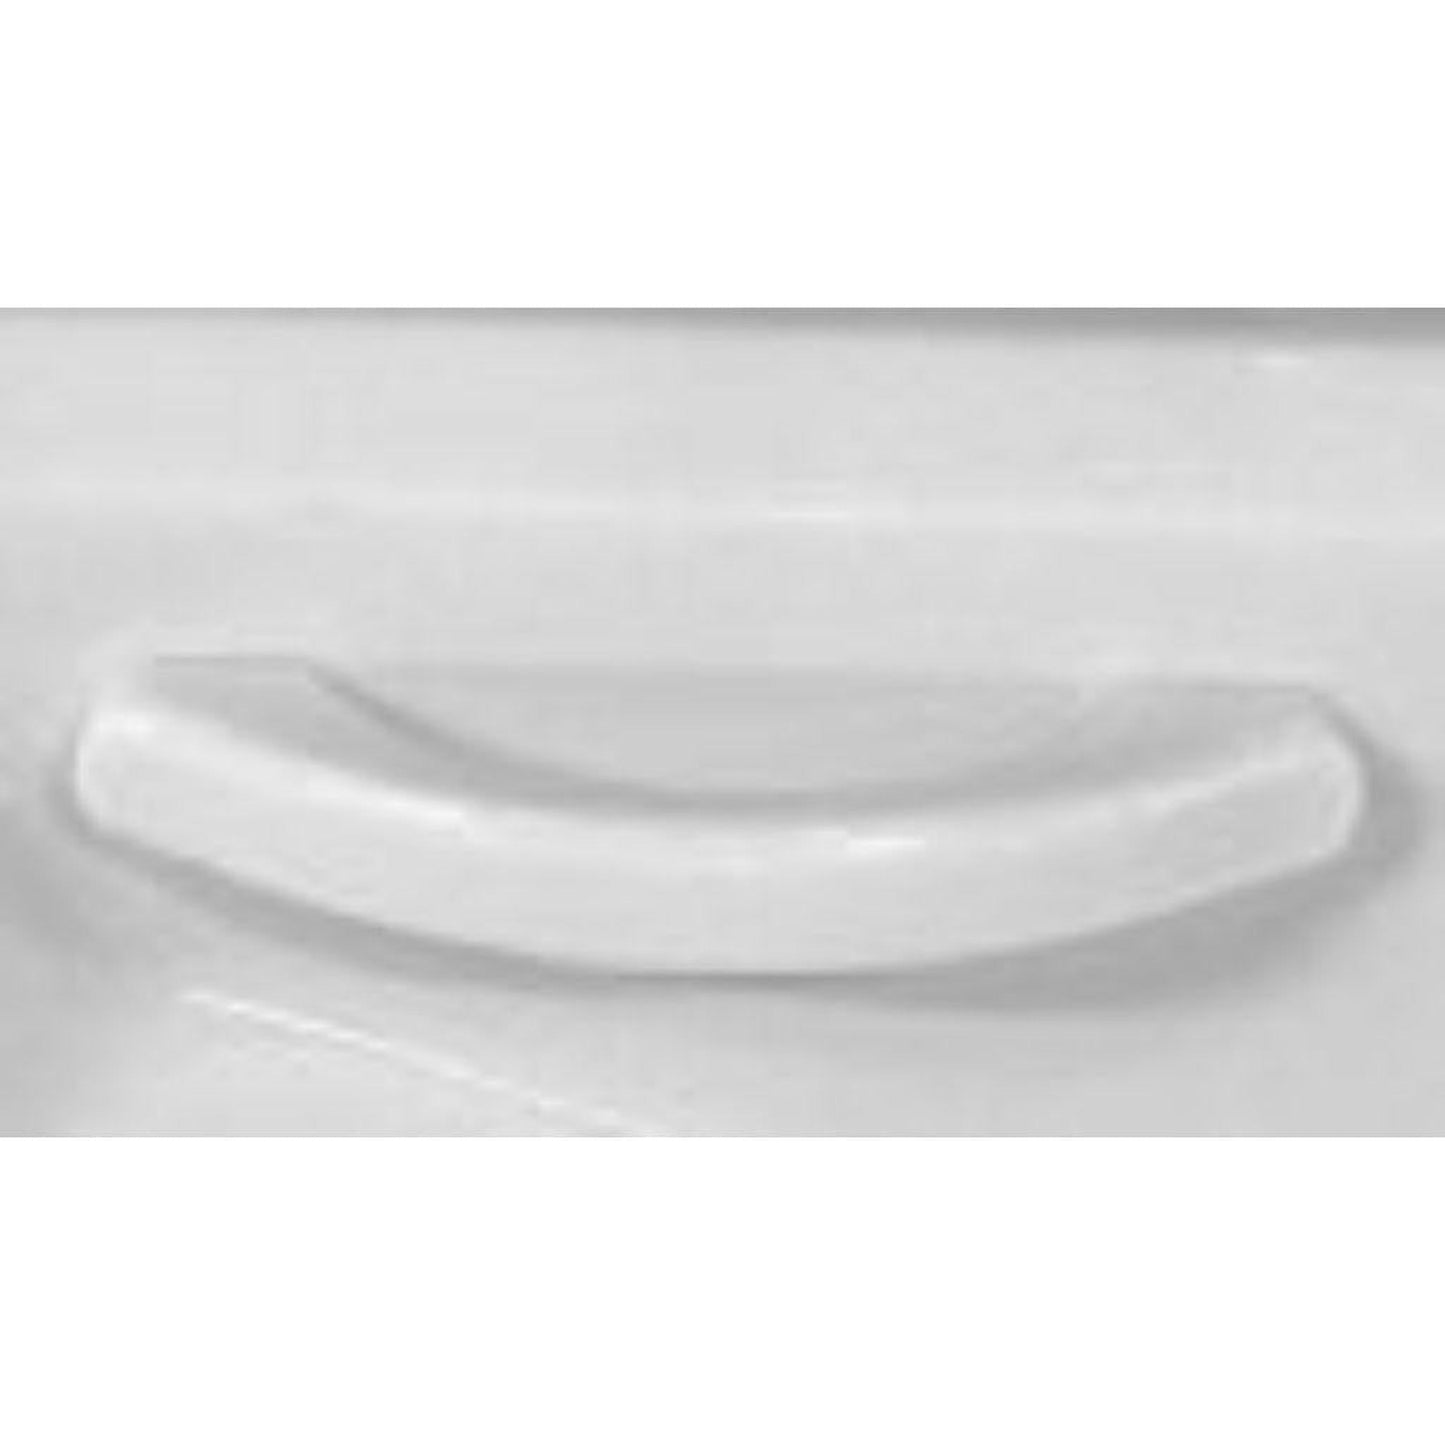 American Acrylic 67.75" x 29.125" White Slipper Style Freestanding With 16-Jet Air Massage System Bathtub